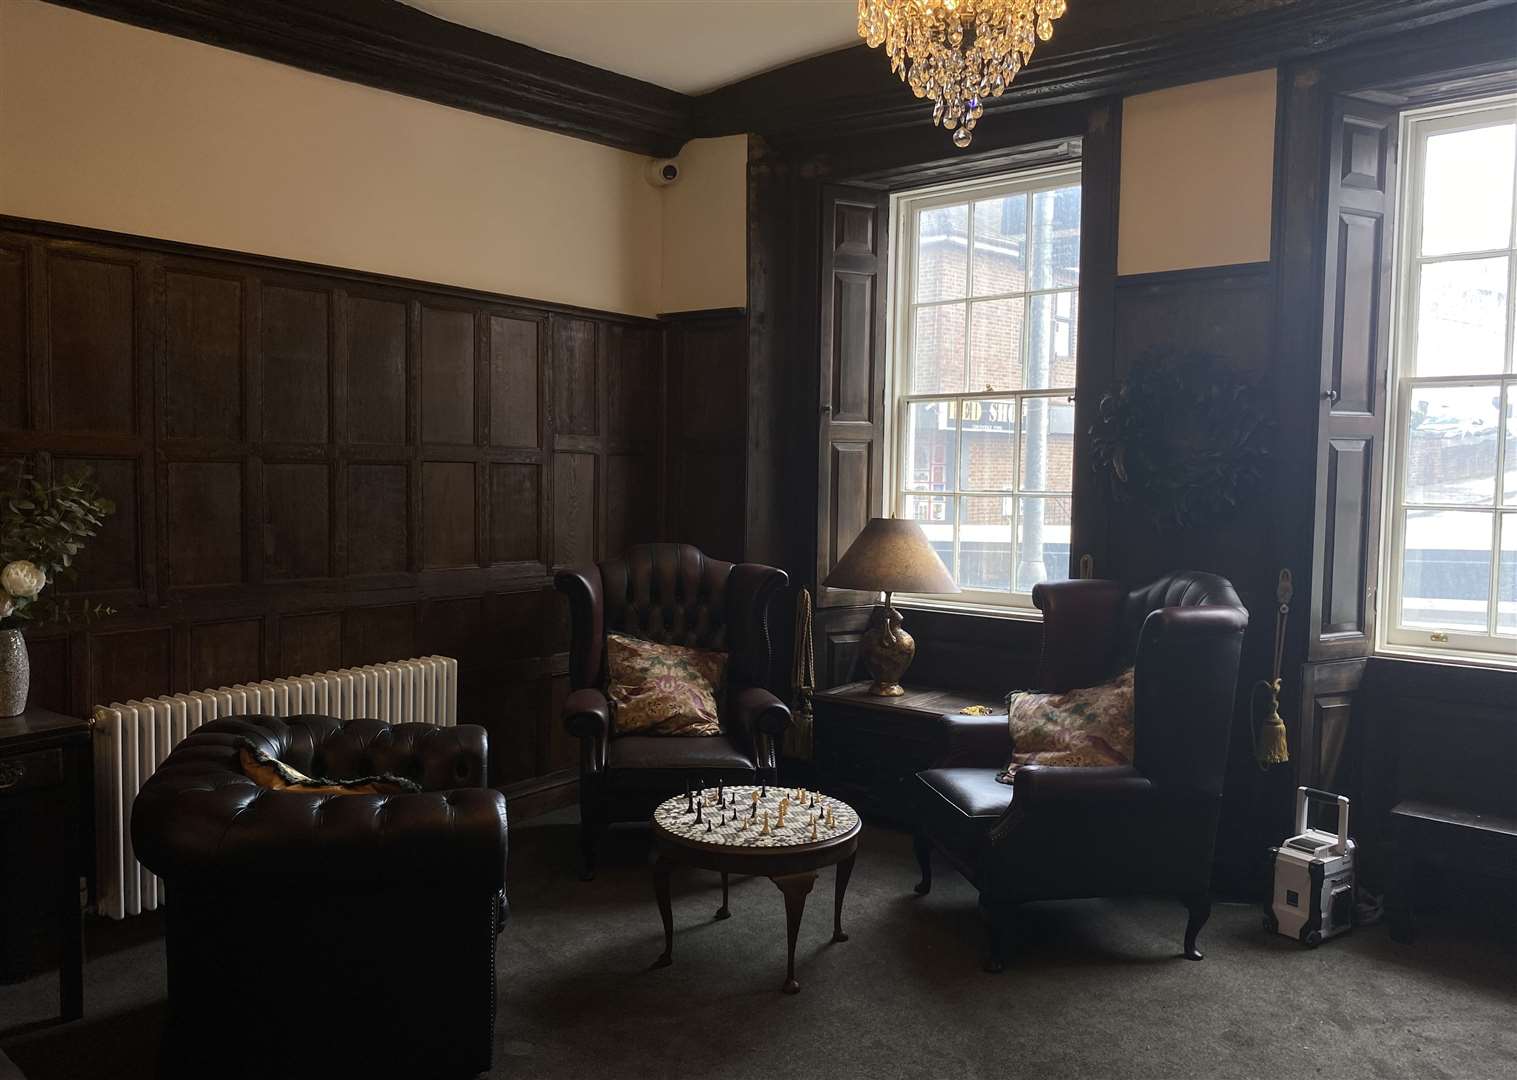 The entrance to the property is now filled with leather chairs and sofas for guests to use